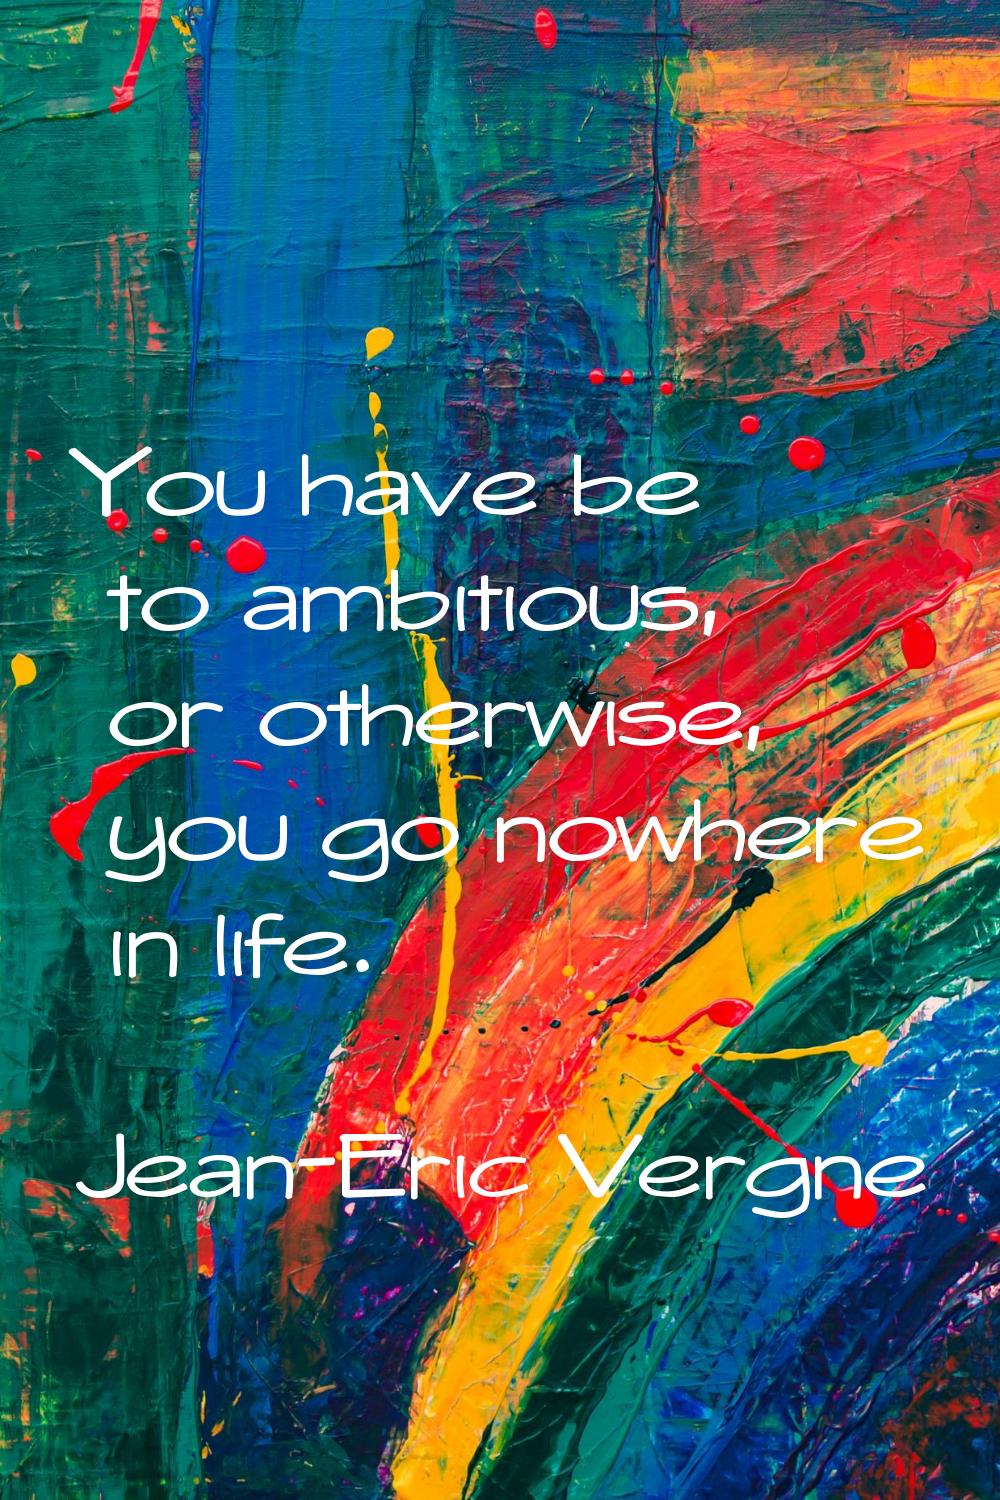 You have be to ambitious, or otherwise, you go nowhere in life.